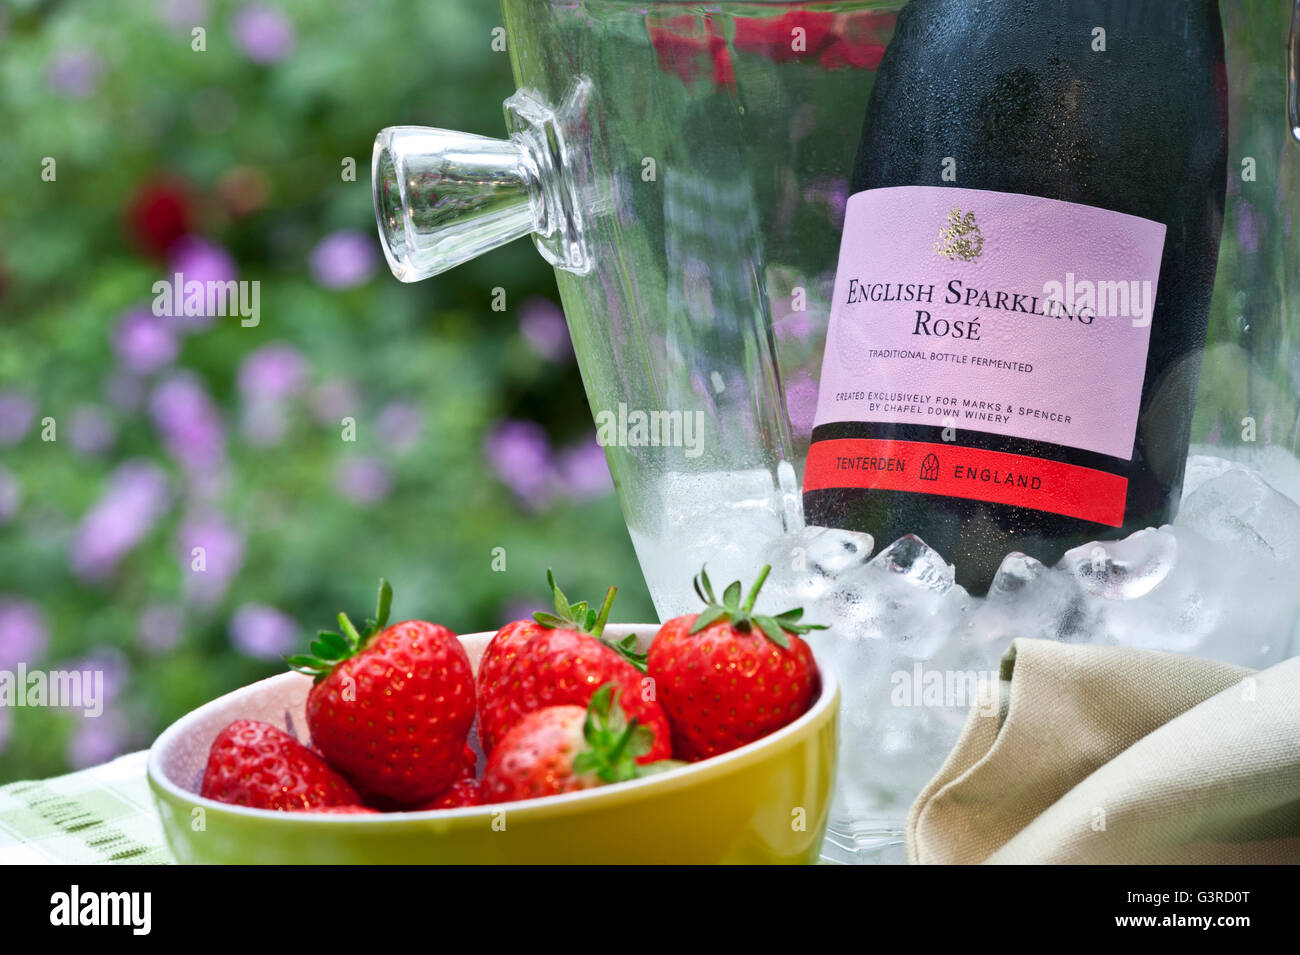 English Sparkling Rosé wine bottle in iced wine chiller with bowl of fresh strawberries on summer staycation alfresco floral table Stock Photo